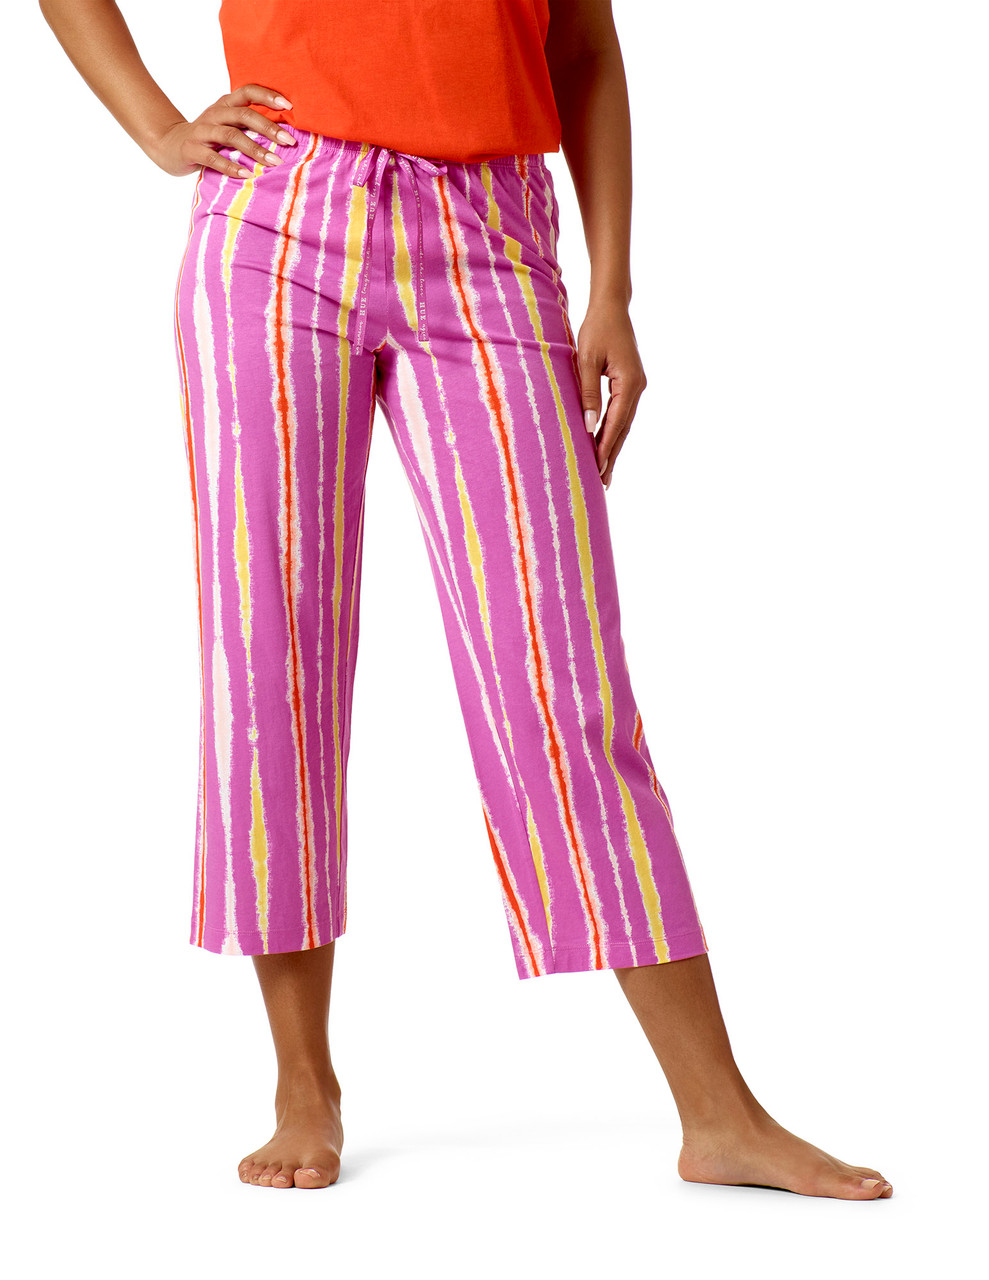 Buy DOLLIT Women's Cotton Capri for Women, 3/4th Night Pants for Women  Combo of 3, 3/4th Pajama, Womens Night Dress (Prints and Colours May Vary)  pack of 3(assorted) (M) at Amazon.in